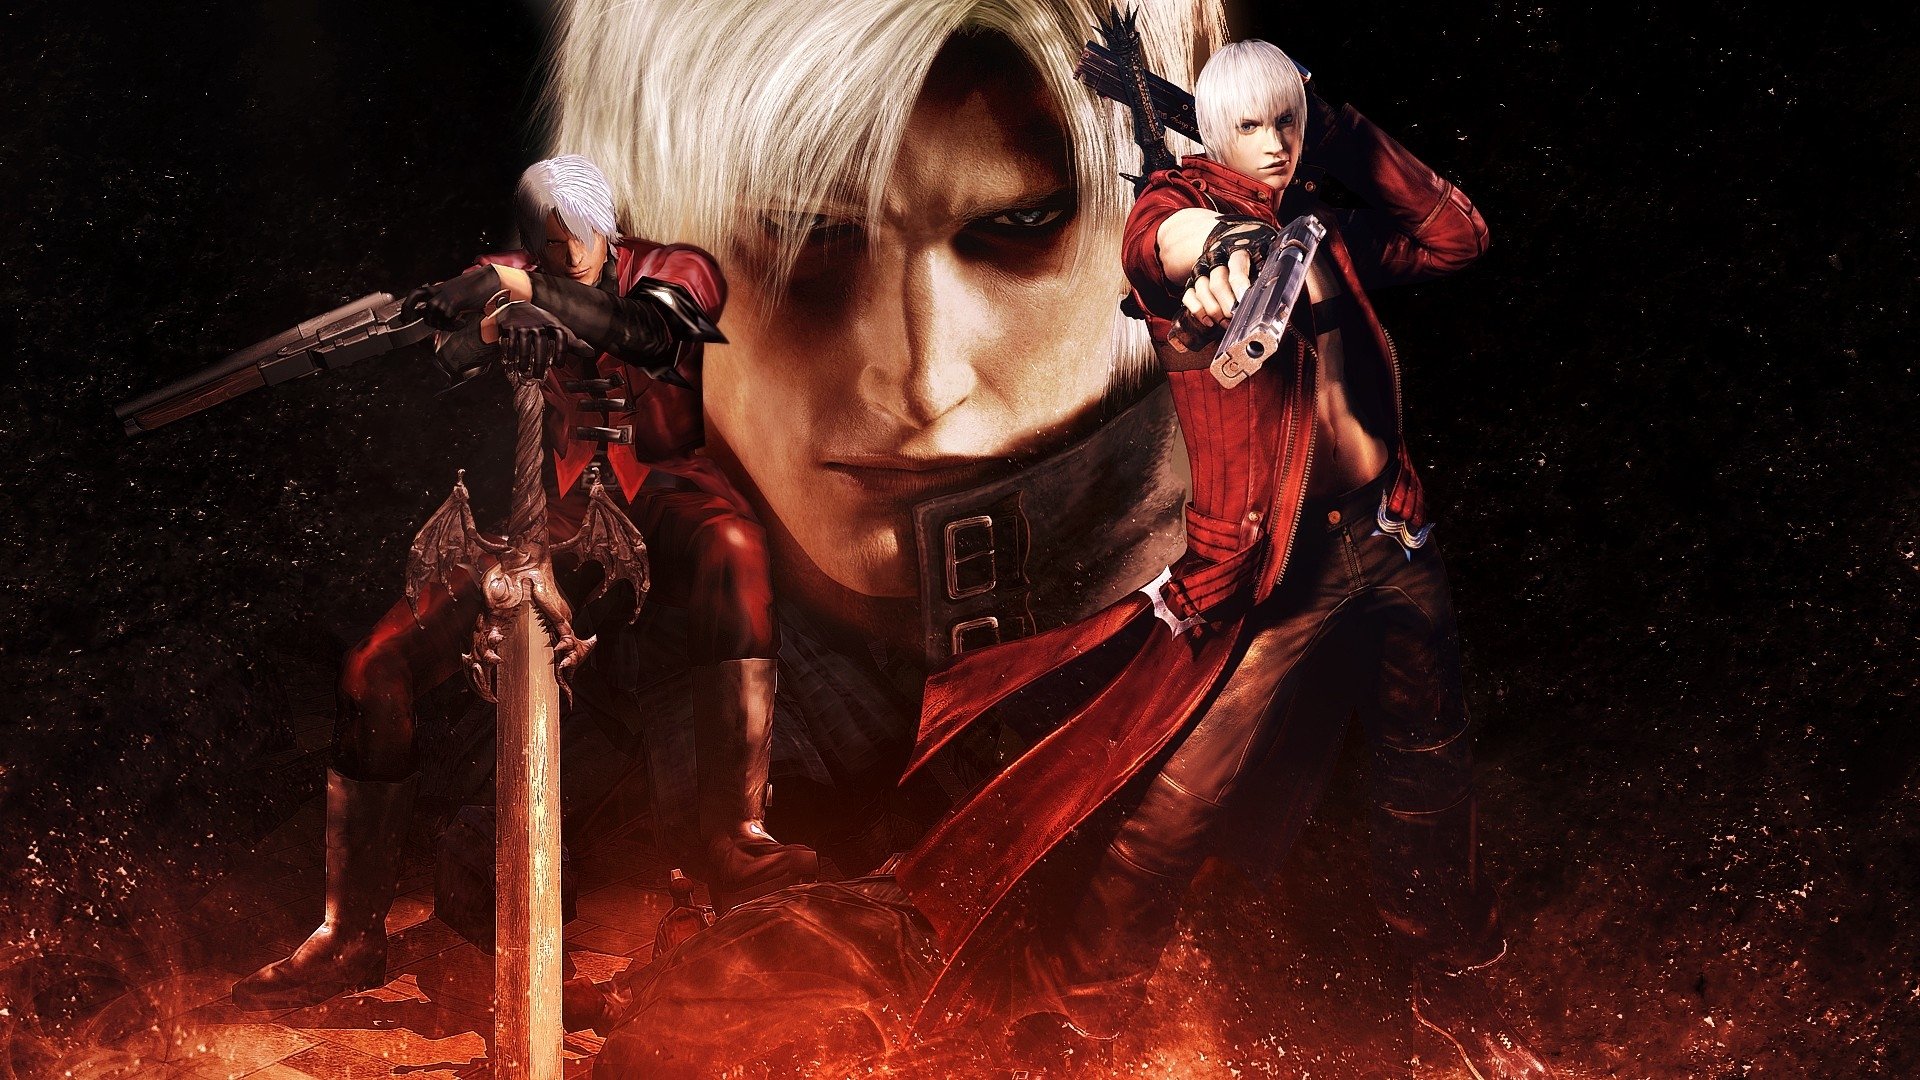 Devil may cry hd paper by syanart